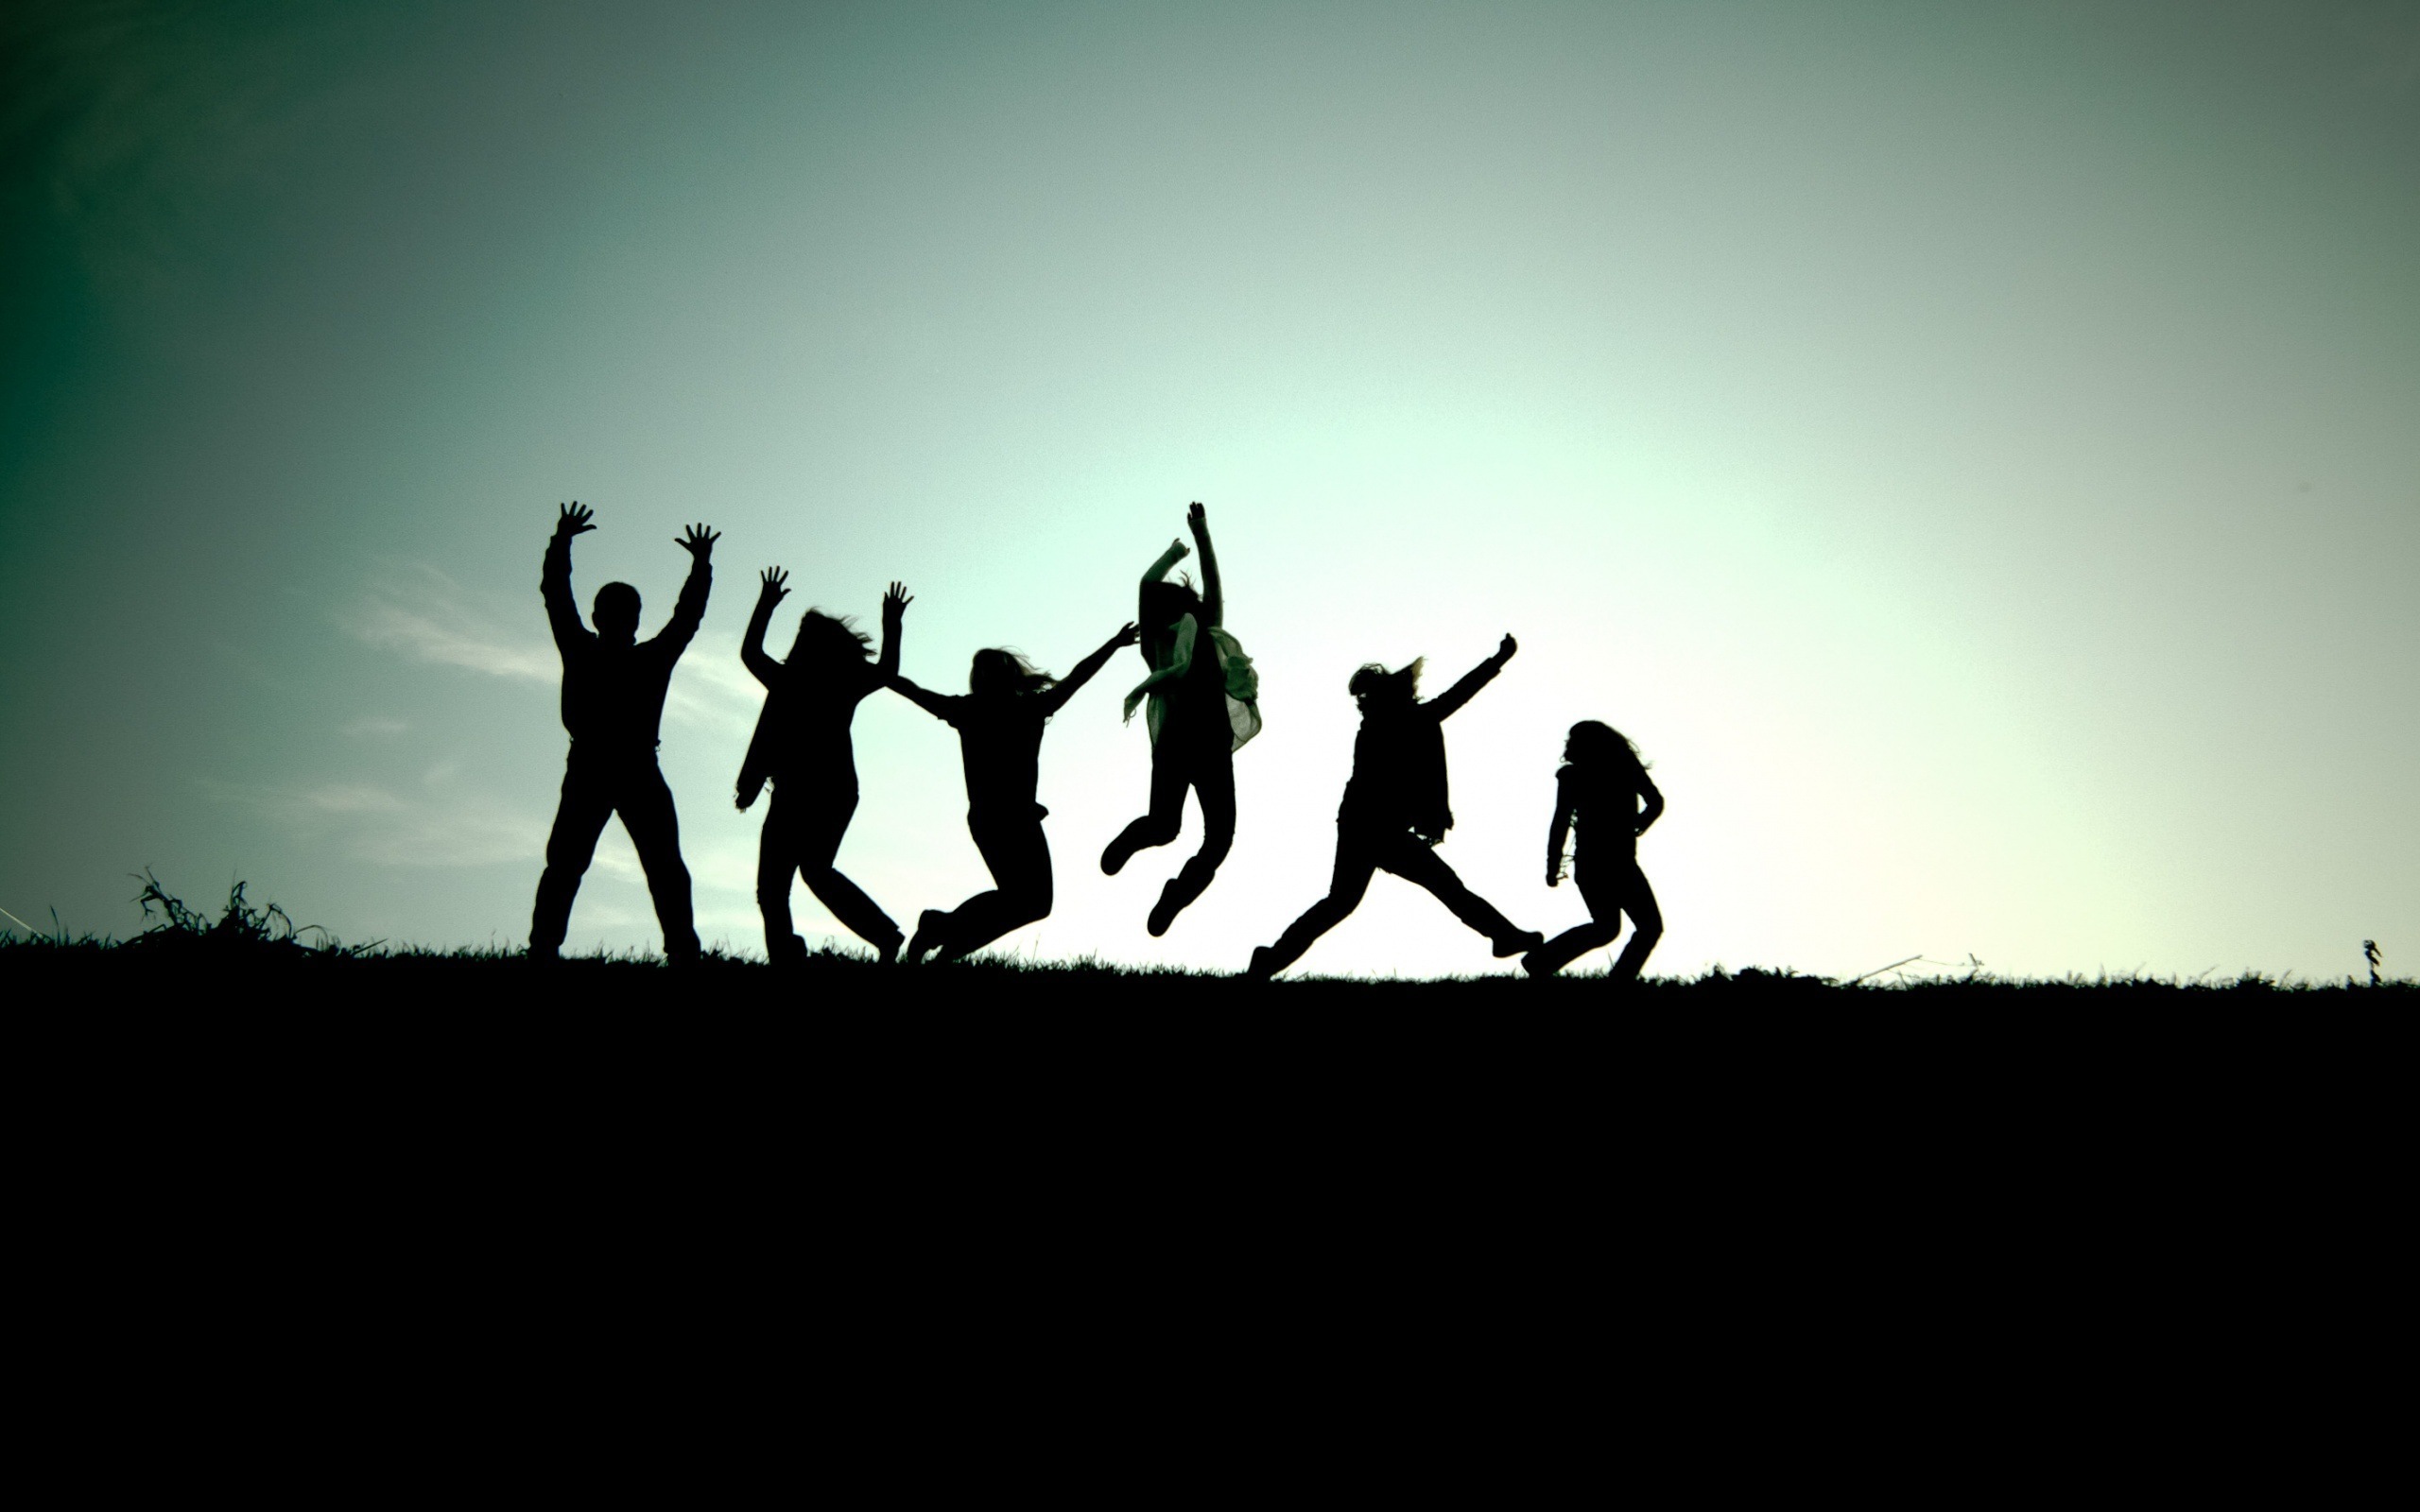 friendship day wallpapers,people in nature,friendship,fun,silhouette,youth